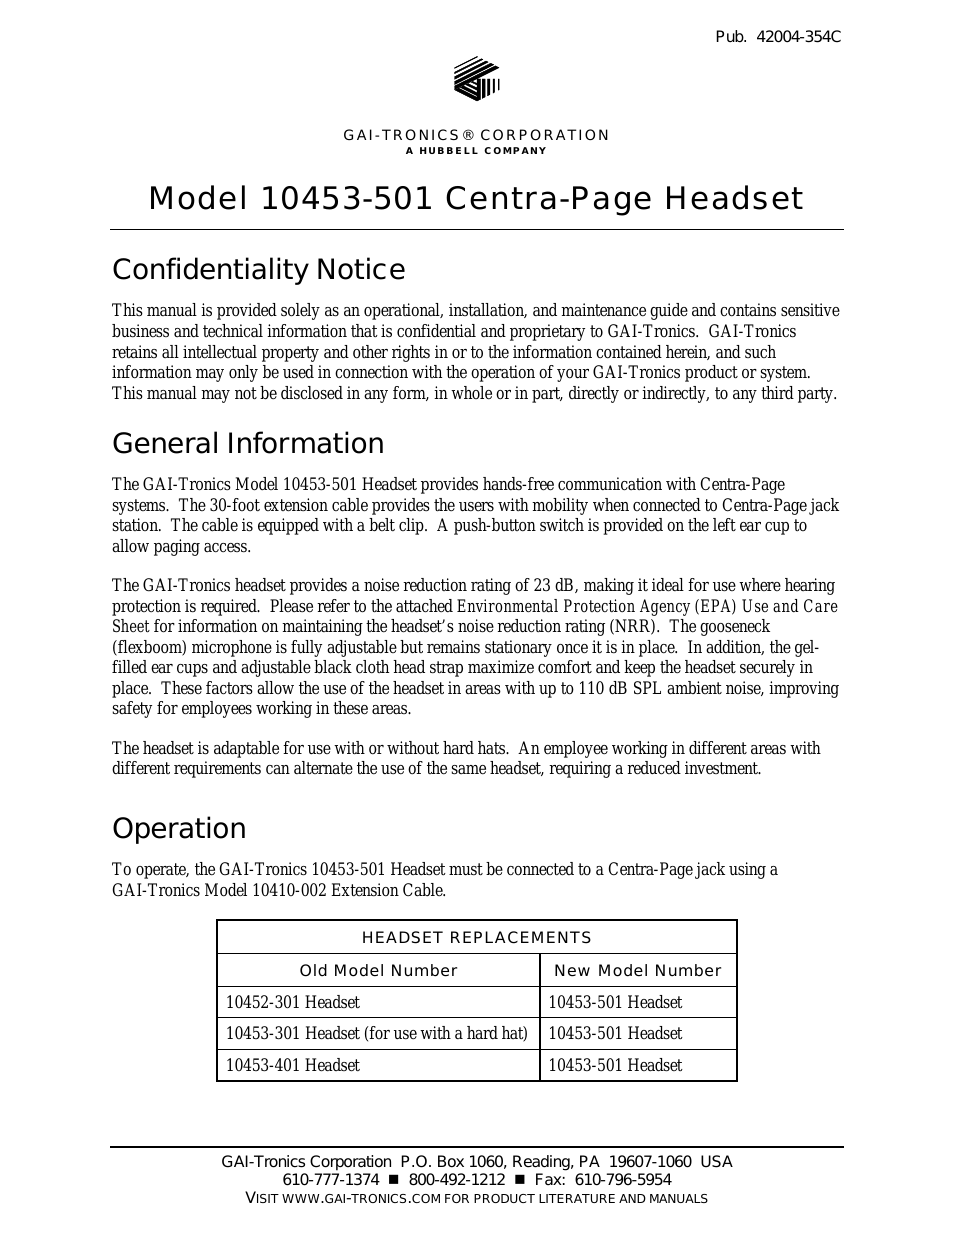 10453-501 Centra-Page Headset